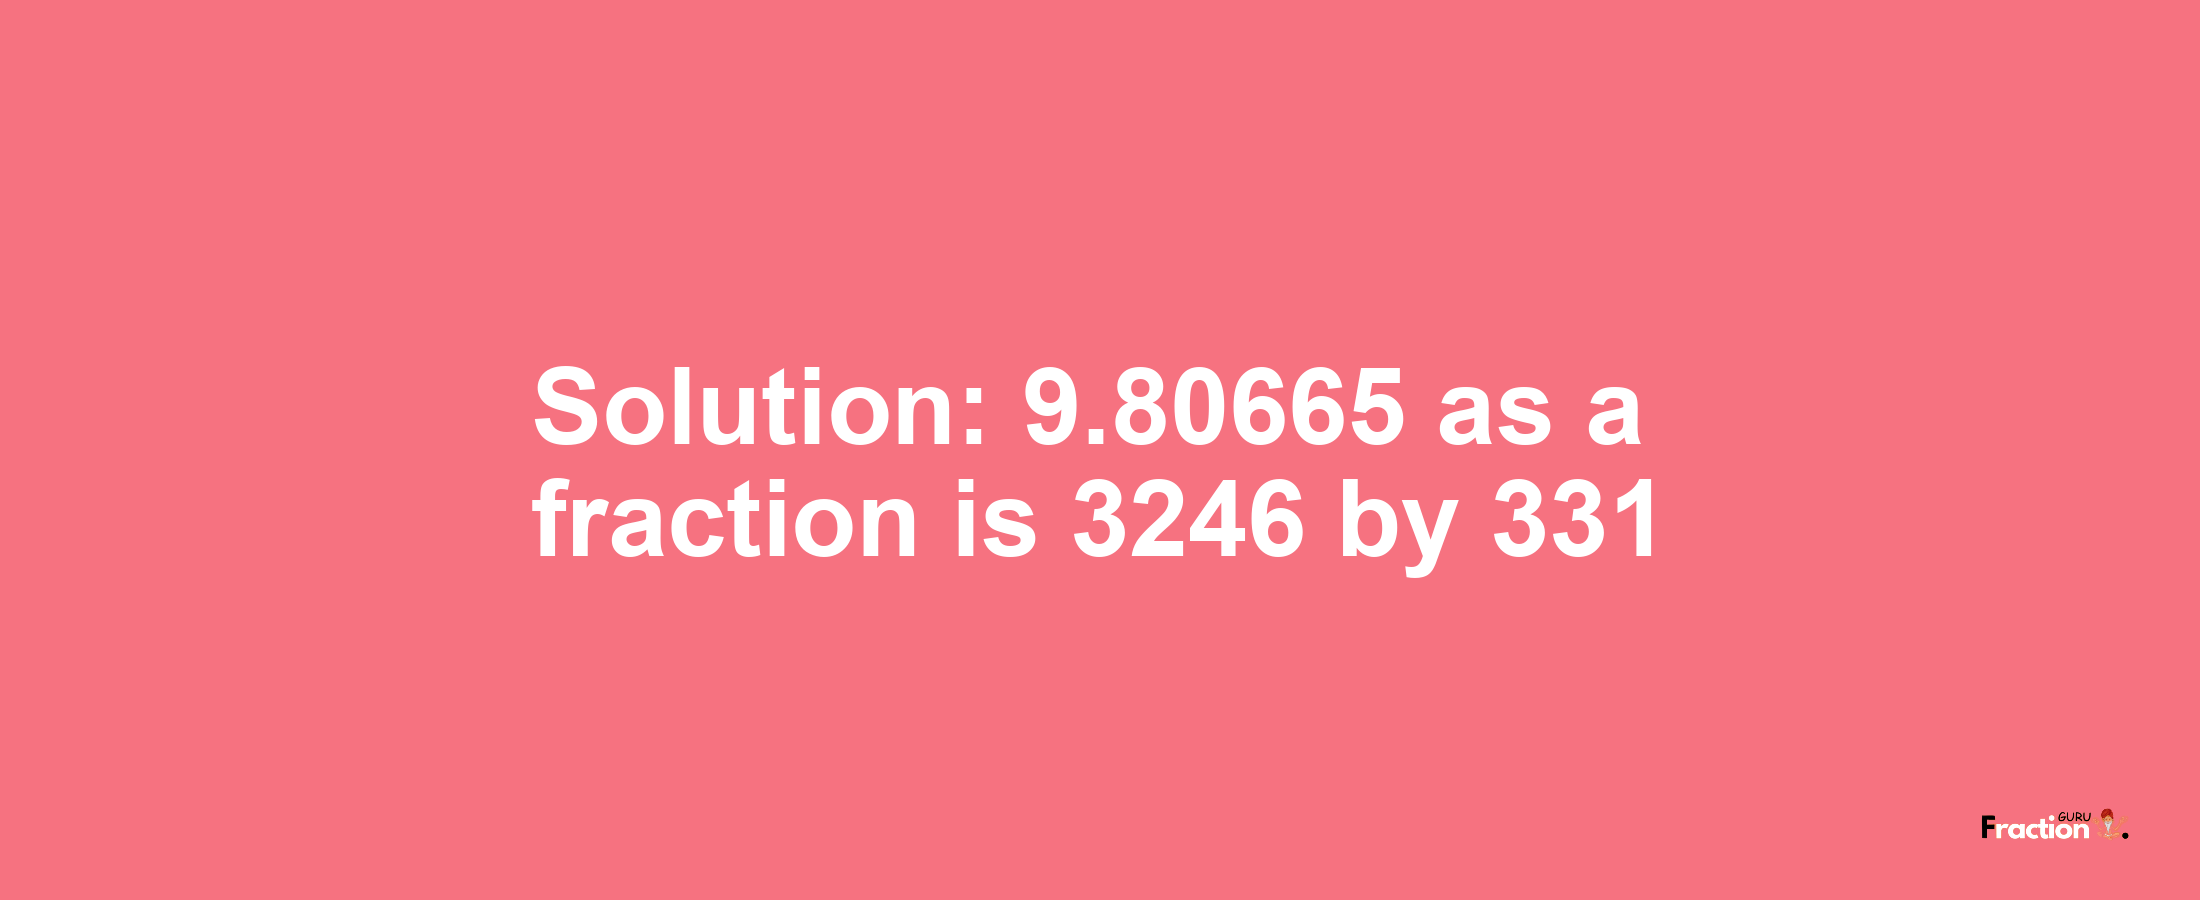 Solution:9.80665 as a fraction is 3246/331